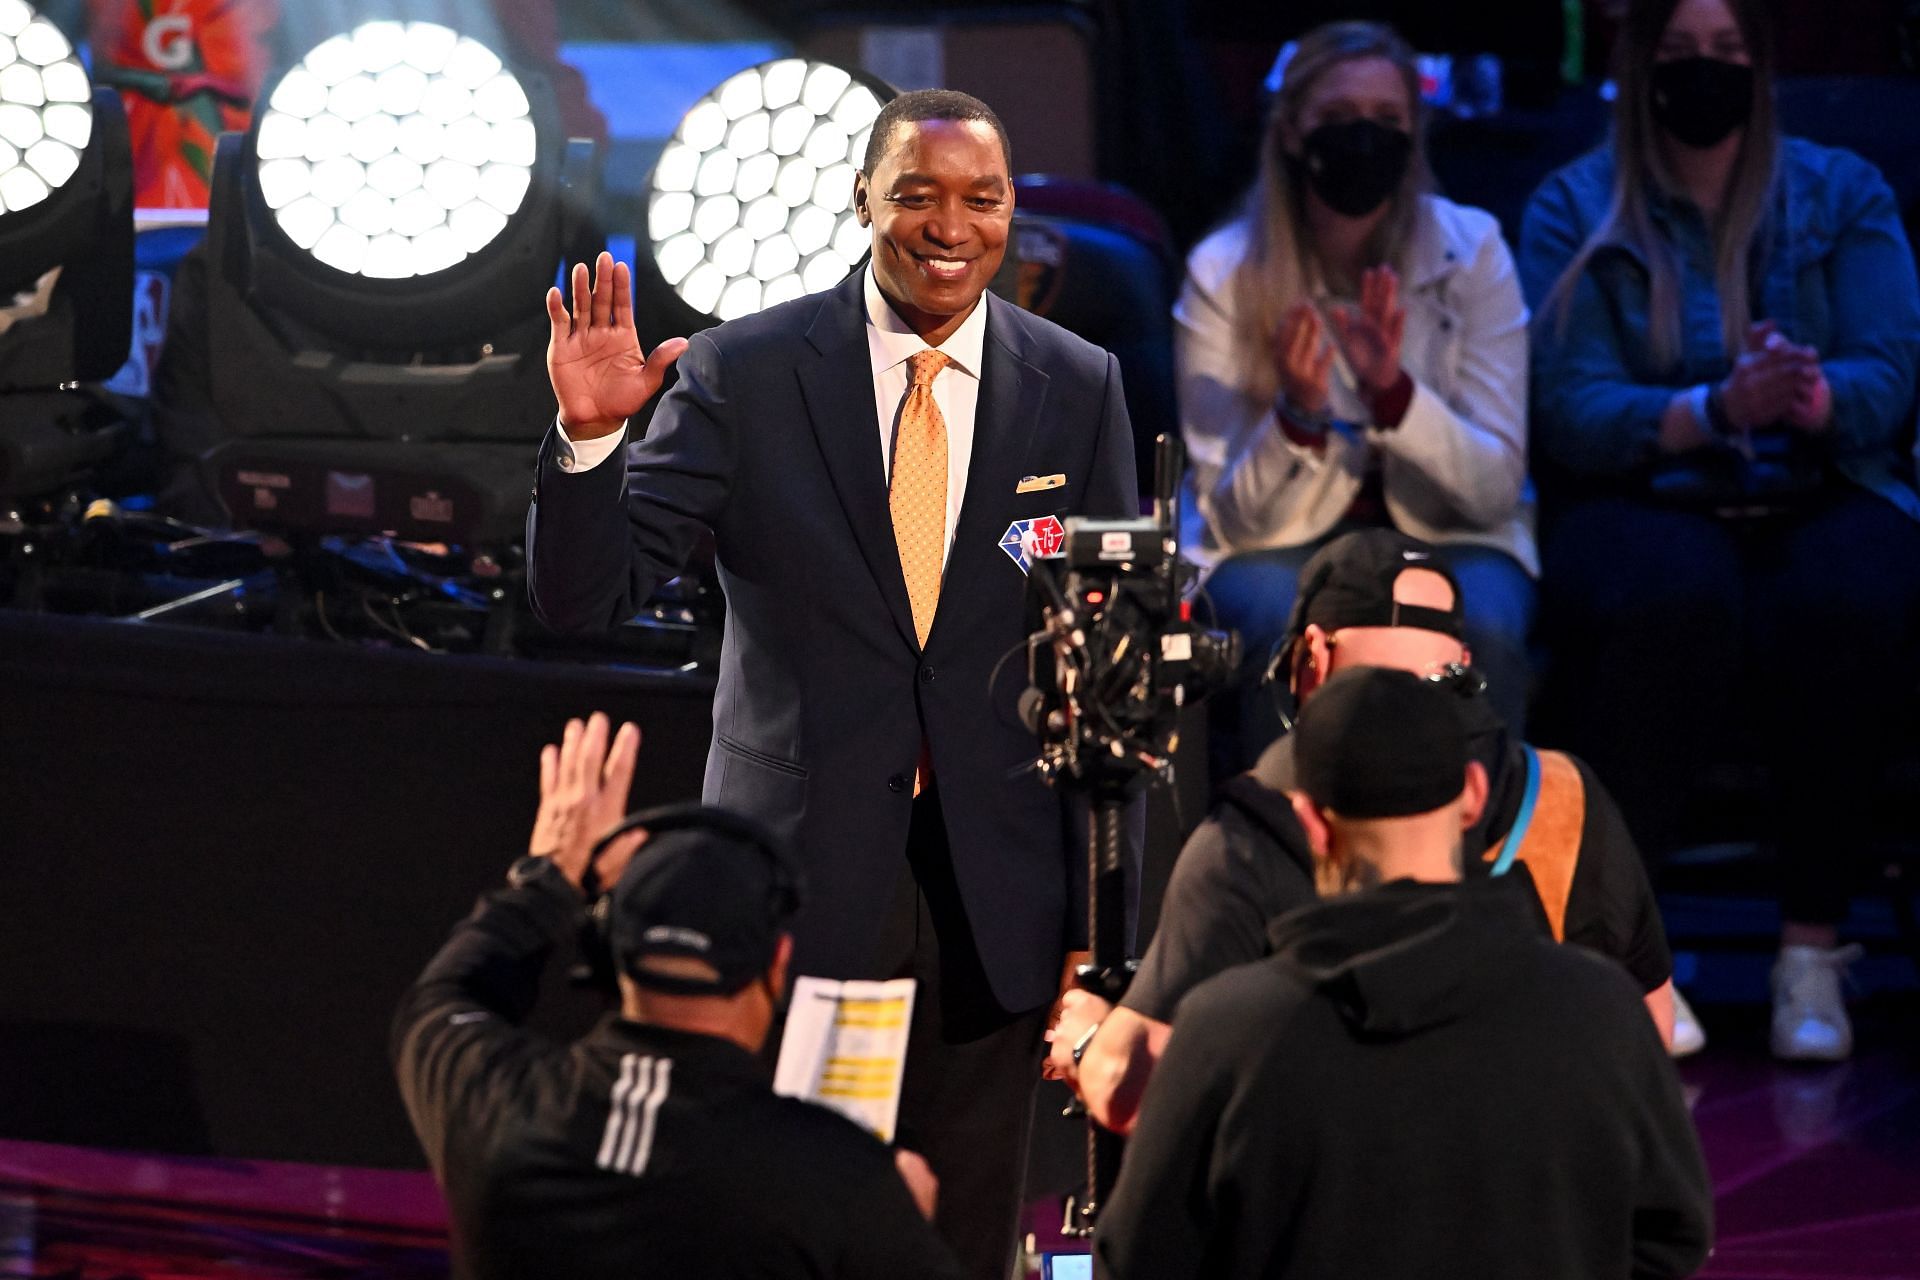 Isiah Thomas reacts after being introduced as part of the NBA 75th Anniversary Team during the 2022 NBA All-Star Game at Rocket Mortgage Fieldhouse on February 20, 2022 in Cleveland, Ohio.